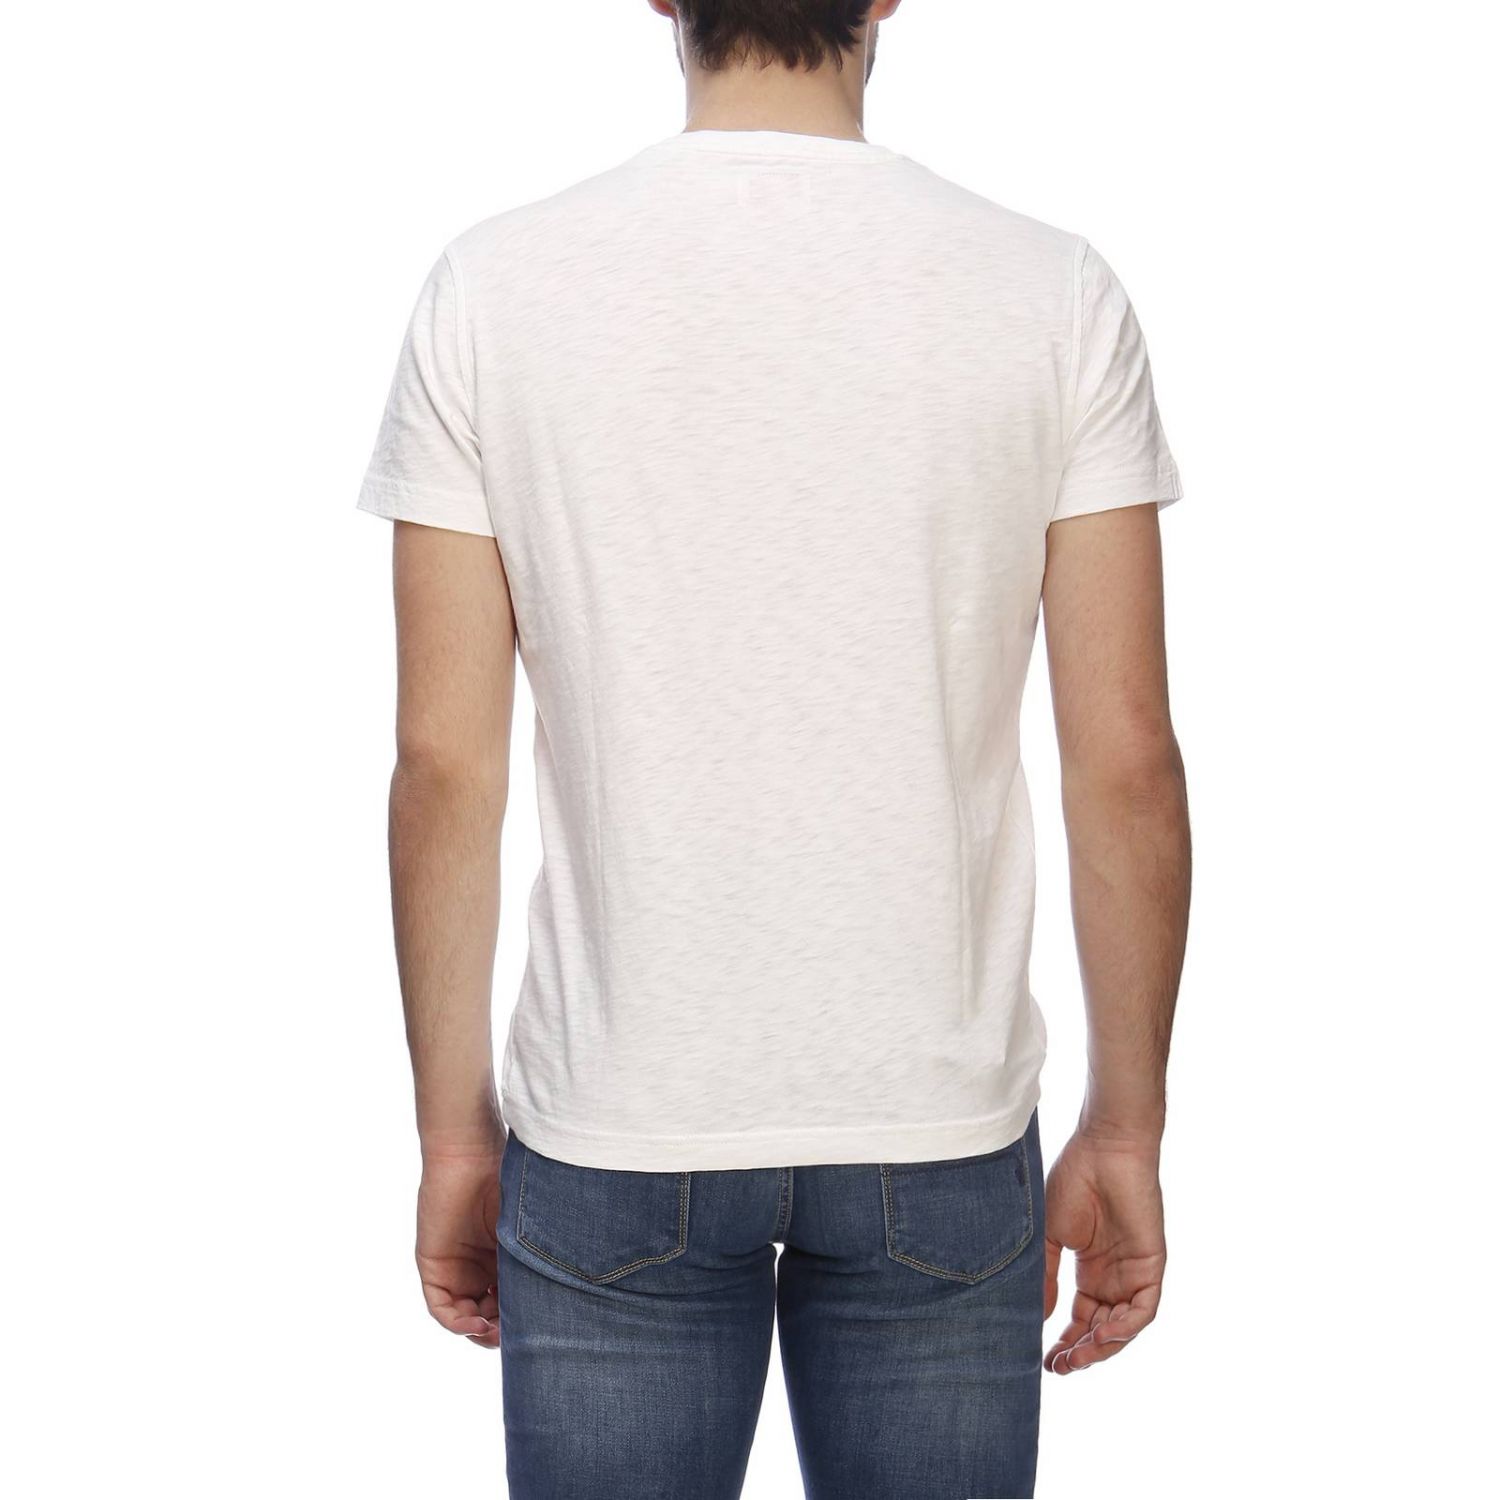 Brooks Brothers Outlet: T-shirt men - White | T-Shirt Brooks Brothers ...